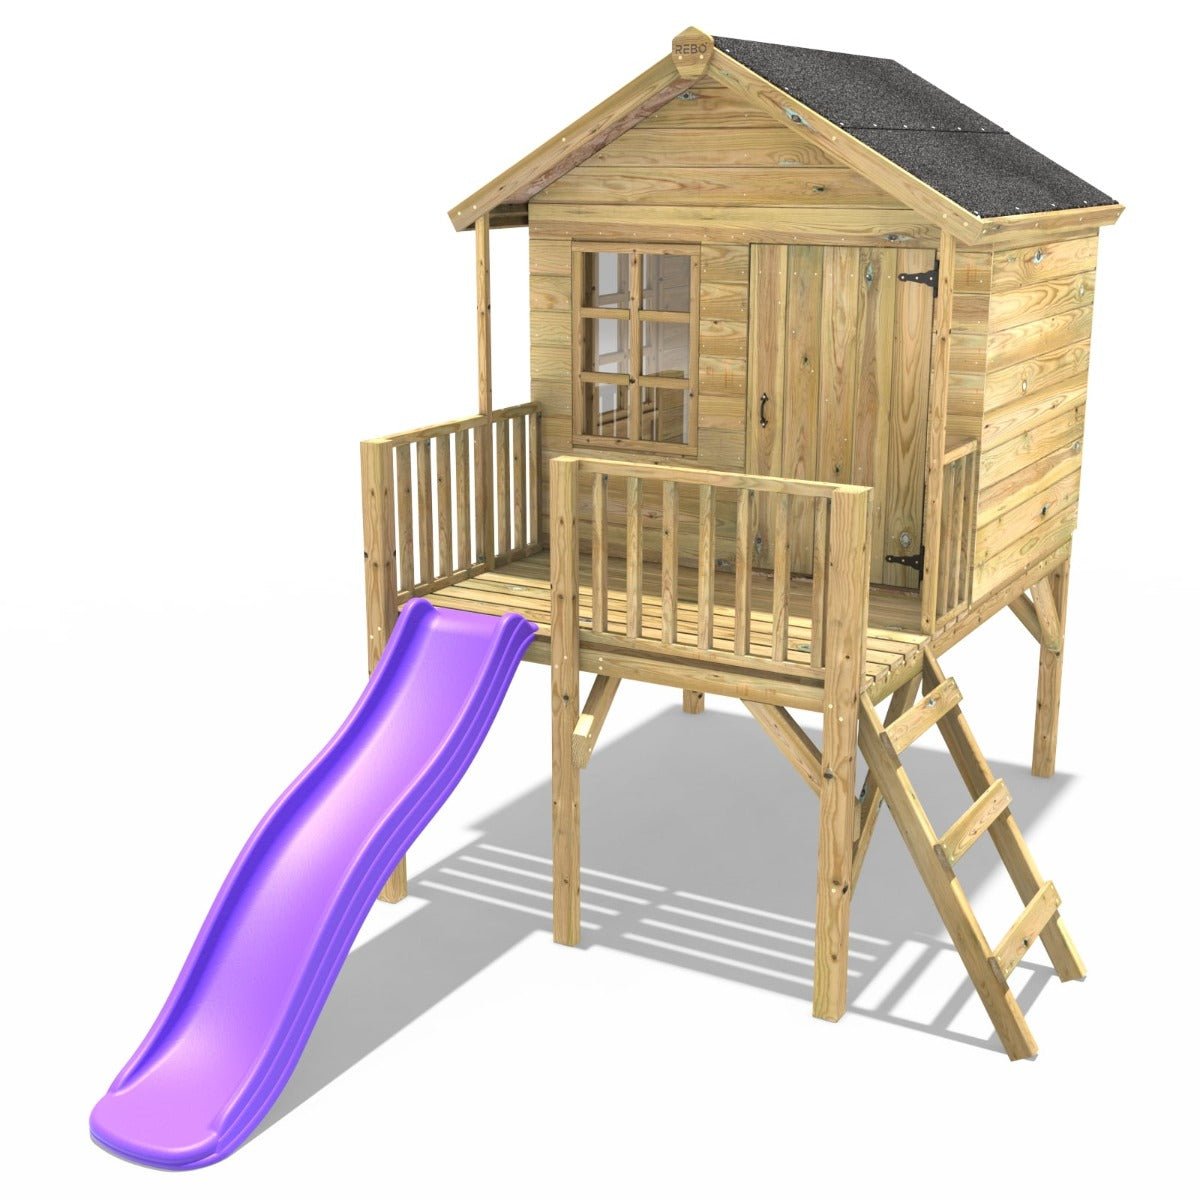 Rebo 5FT x 5FT Childrens Wooden Garden Playhouse on Deck with 6ft Slide - Pheasant Purple